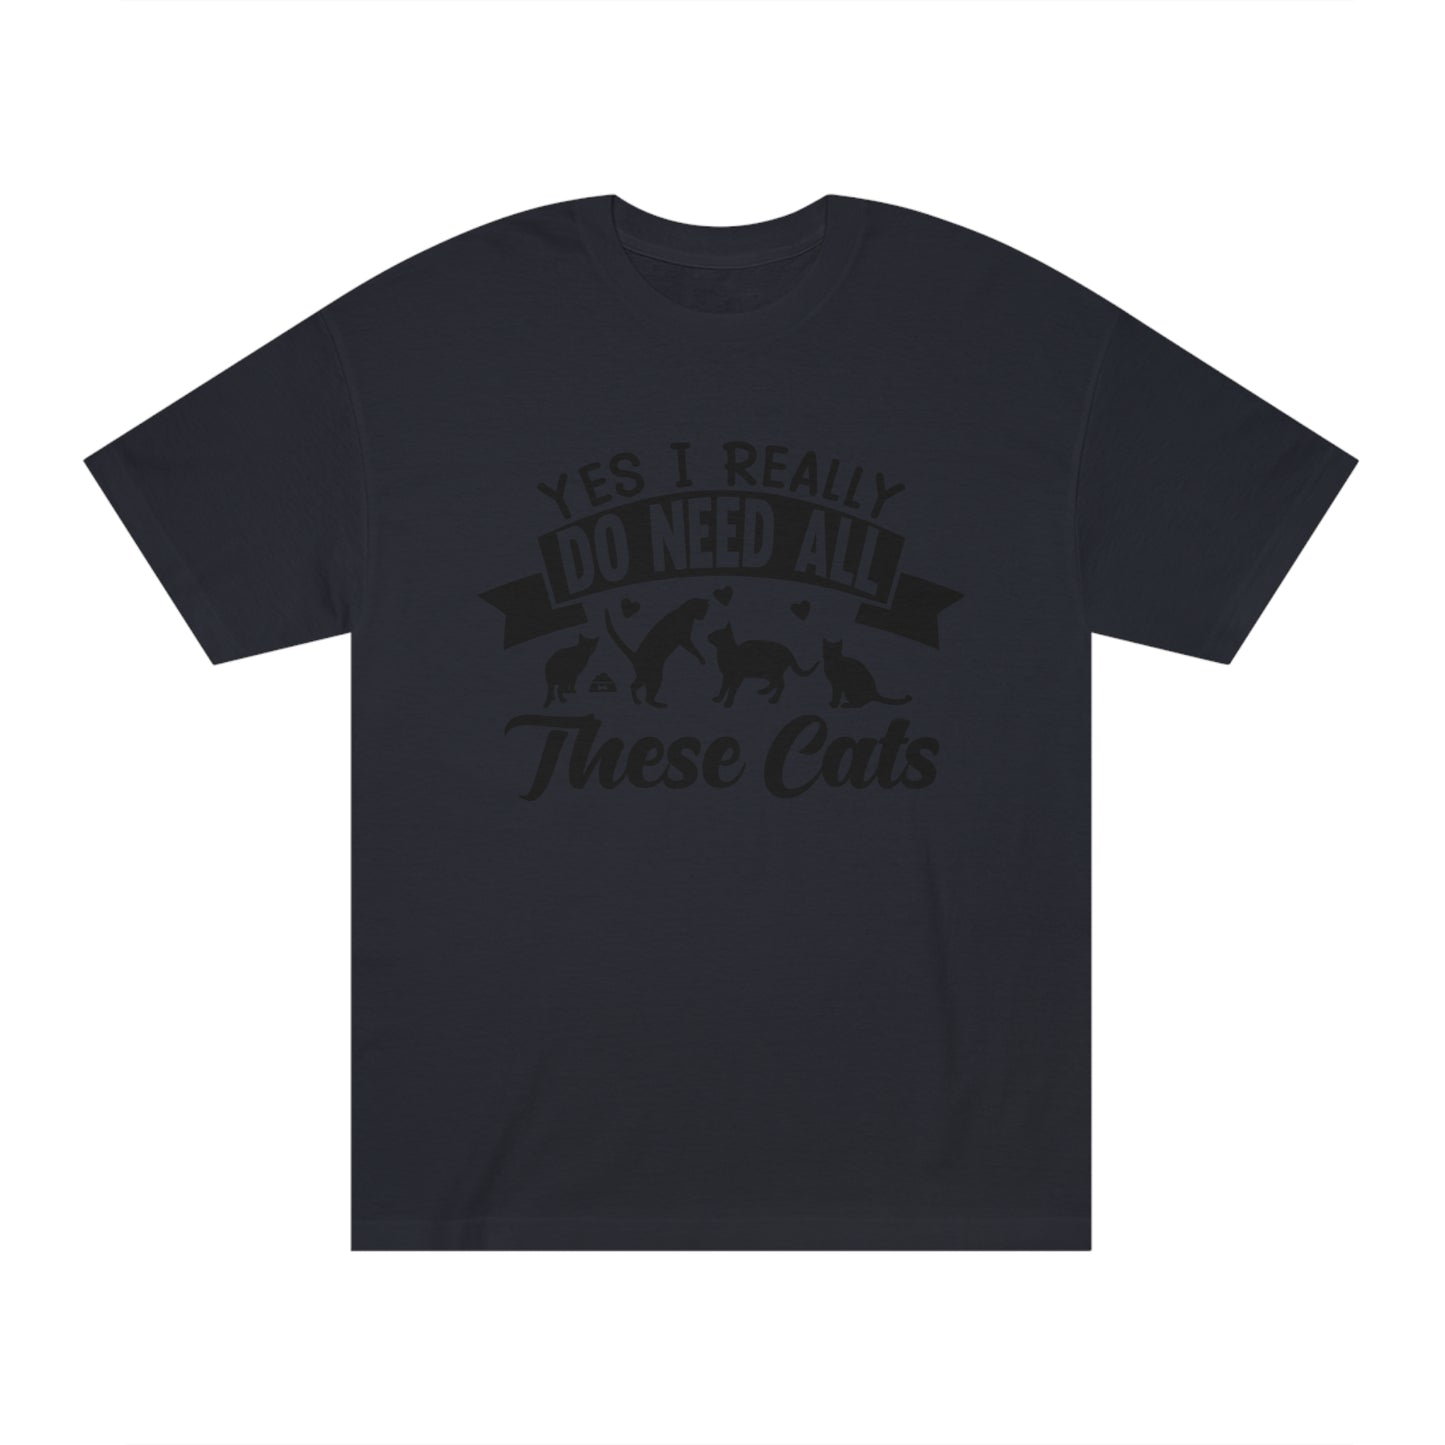 I need all these cats Unisex Classic Tee